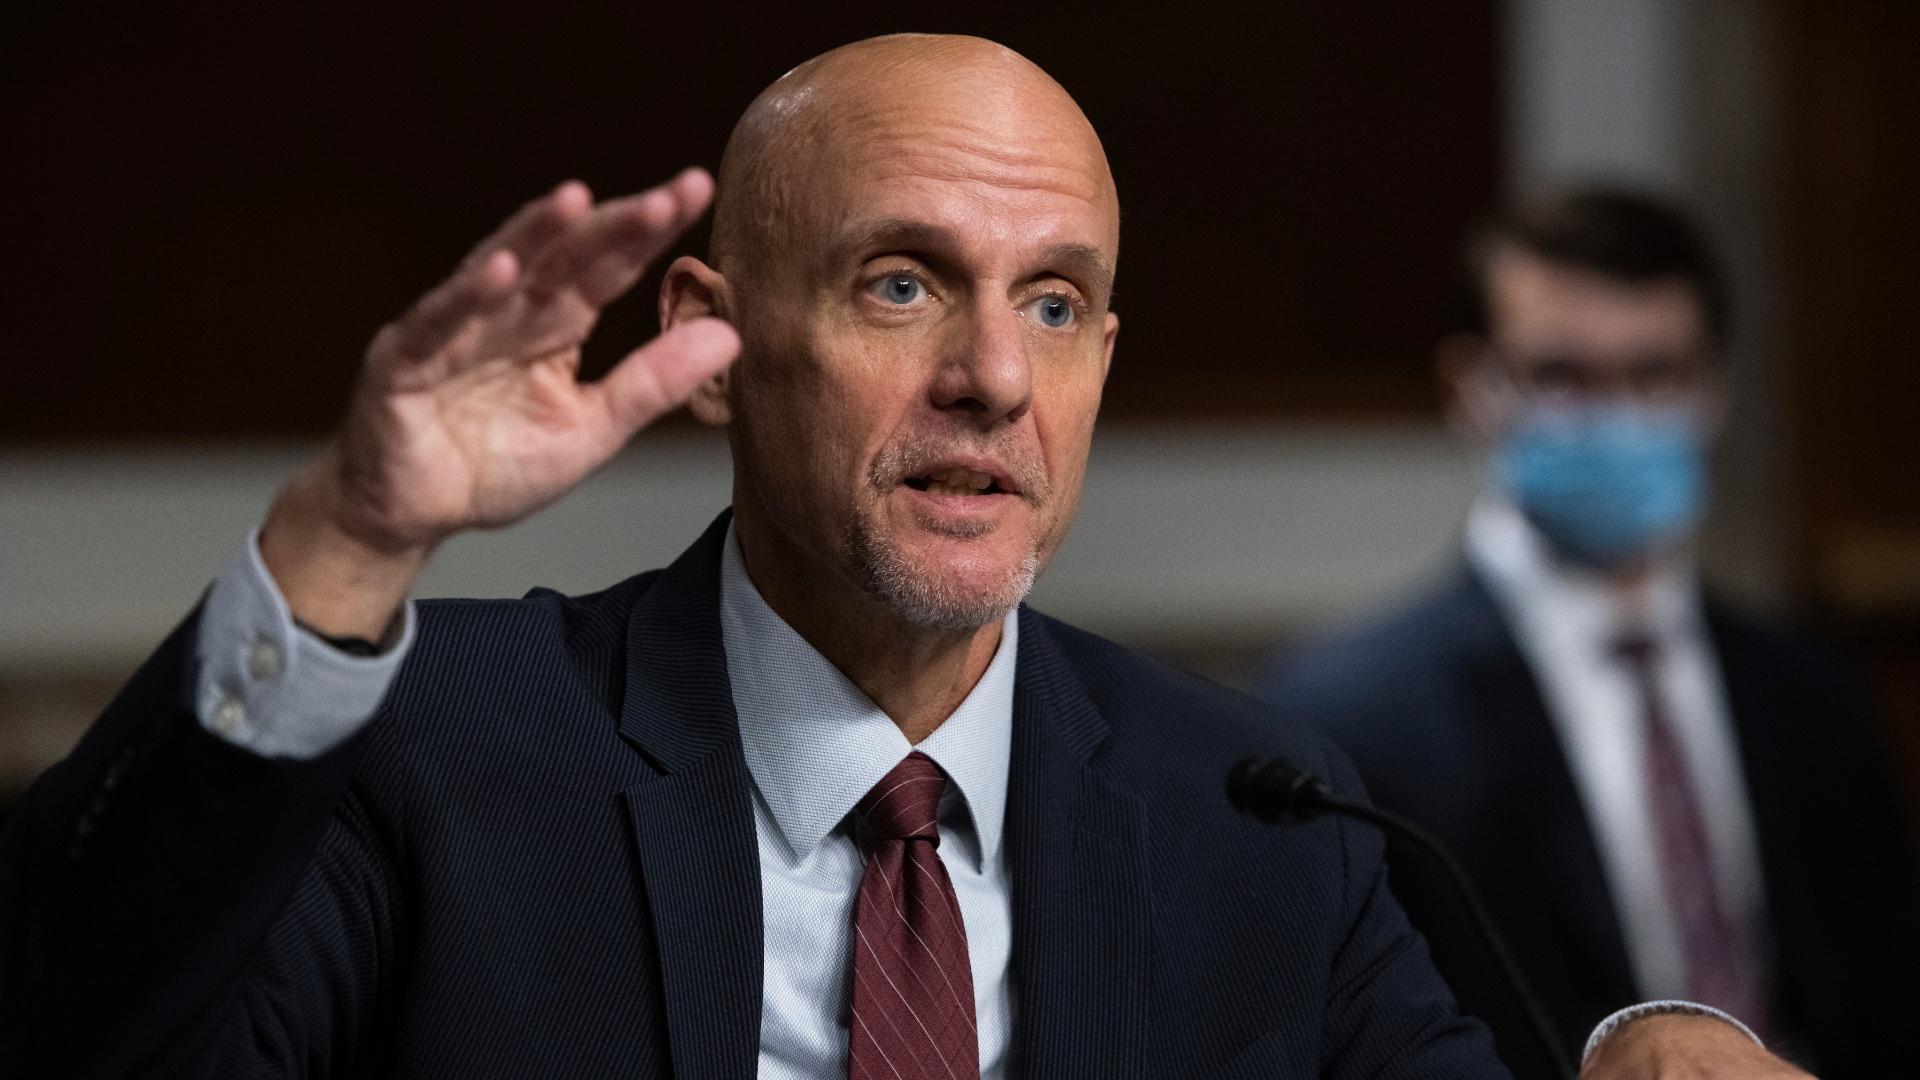 In this Sept. 23, 2020, file photo, Dr. Stephen Hahn, commissioner of the U.S. Food and Drug Administration, testifies during a Senate Health, Education, Labor, and Pensions Committee Hearing on the federal government response to COVID-19 on Capitol Hill. (Graeme Jennings / Pool via AP, File)